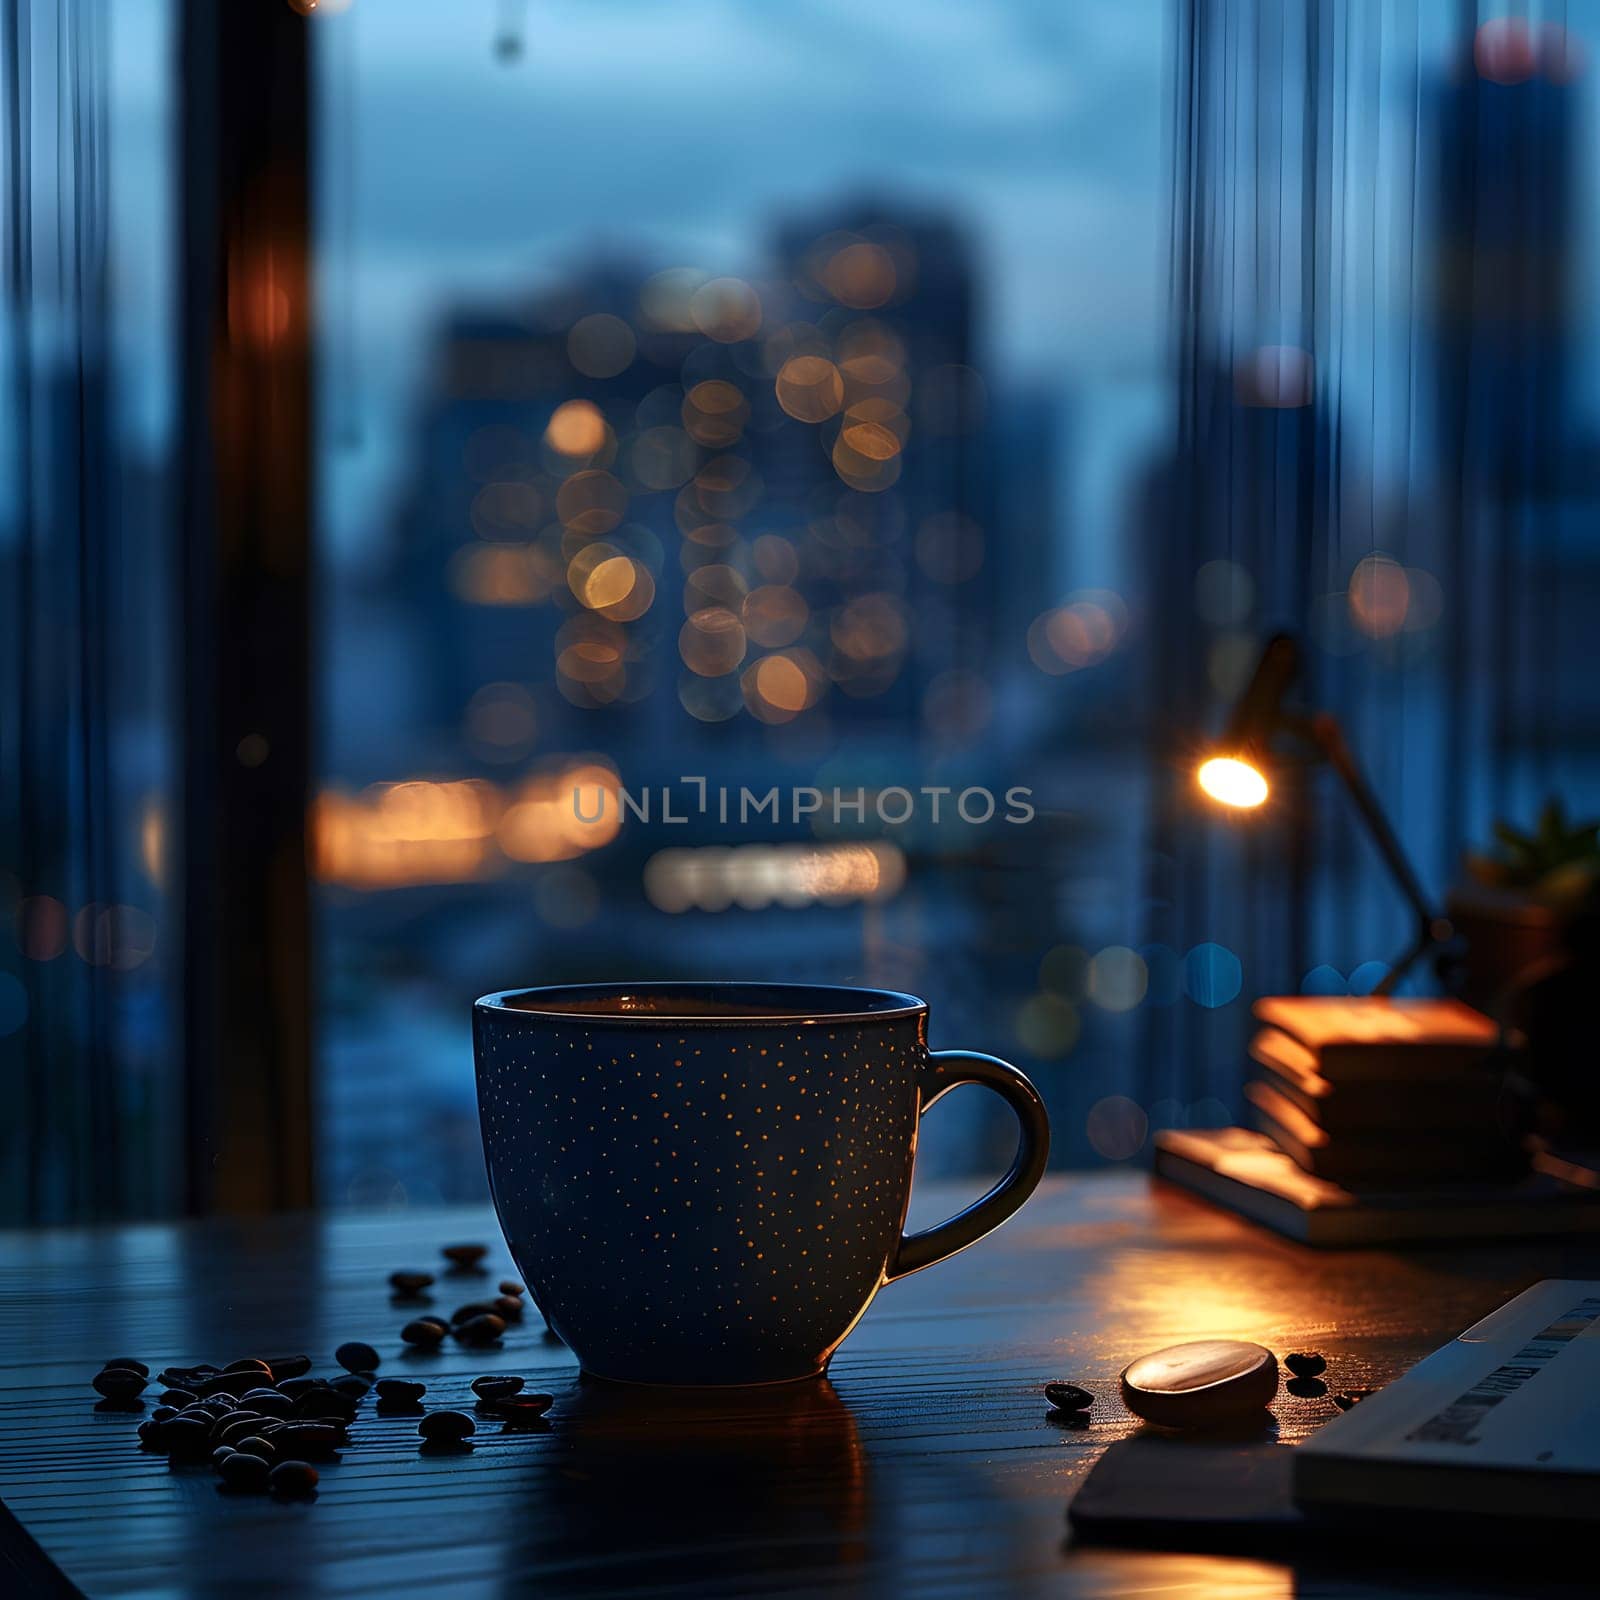 A coffee cup rests on a table by a window, with sunlight streaming through. The serene scene invites a moment of calm reflection